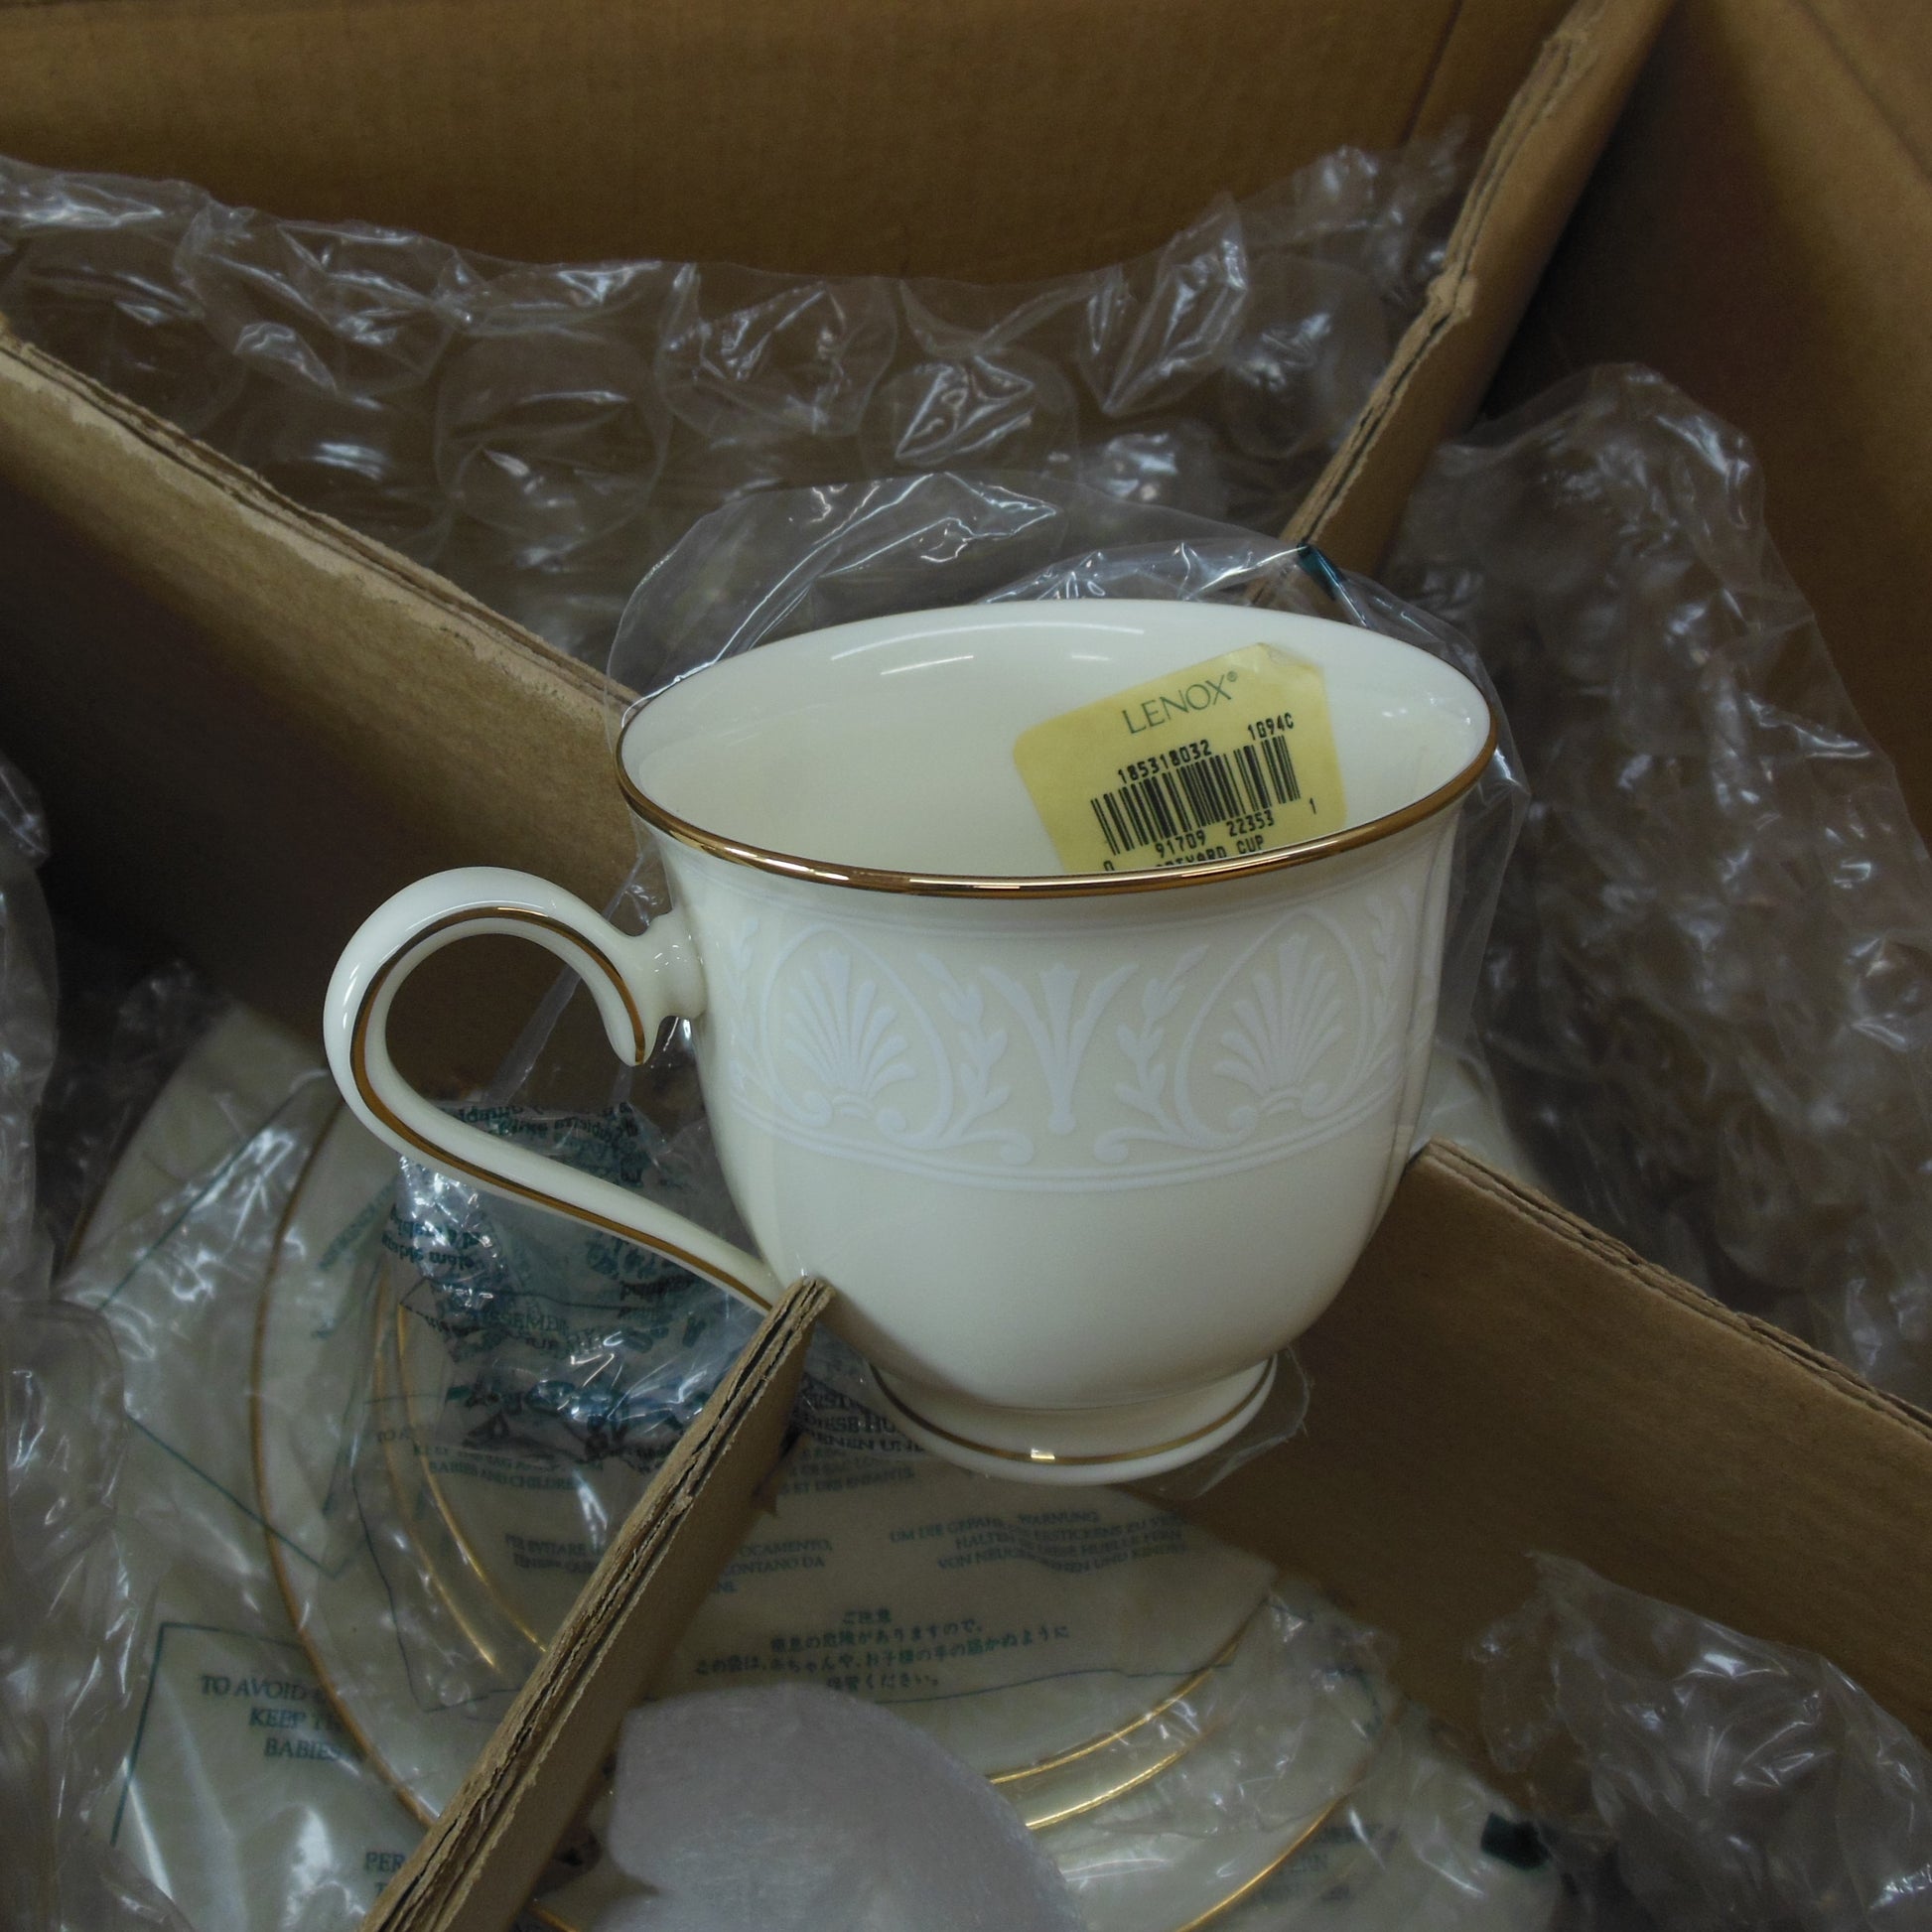 Lenox Fine China Courtyard Gold 5 Piece Place Setting - New in Box cup saucer plates